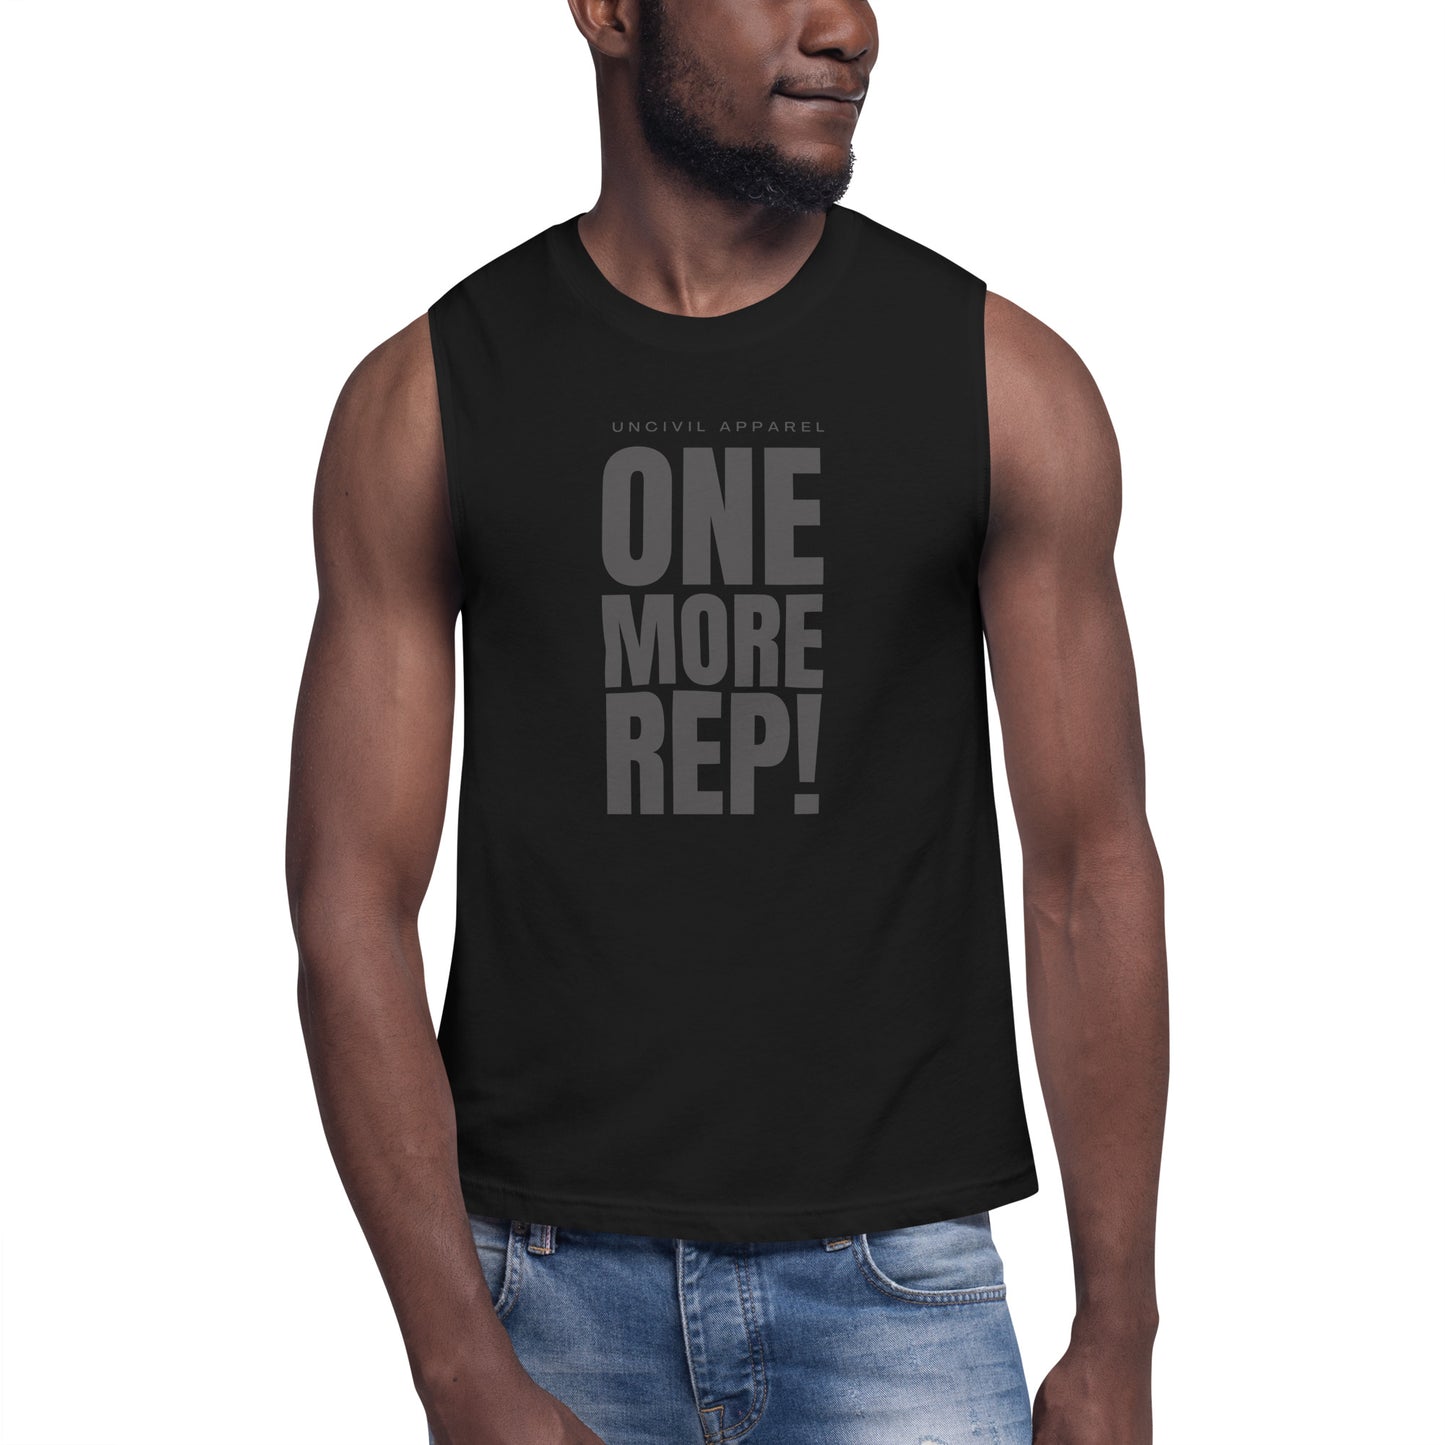 One More Rep Unisex Muscle Tee for workout motivation